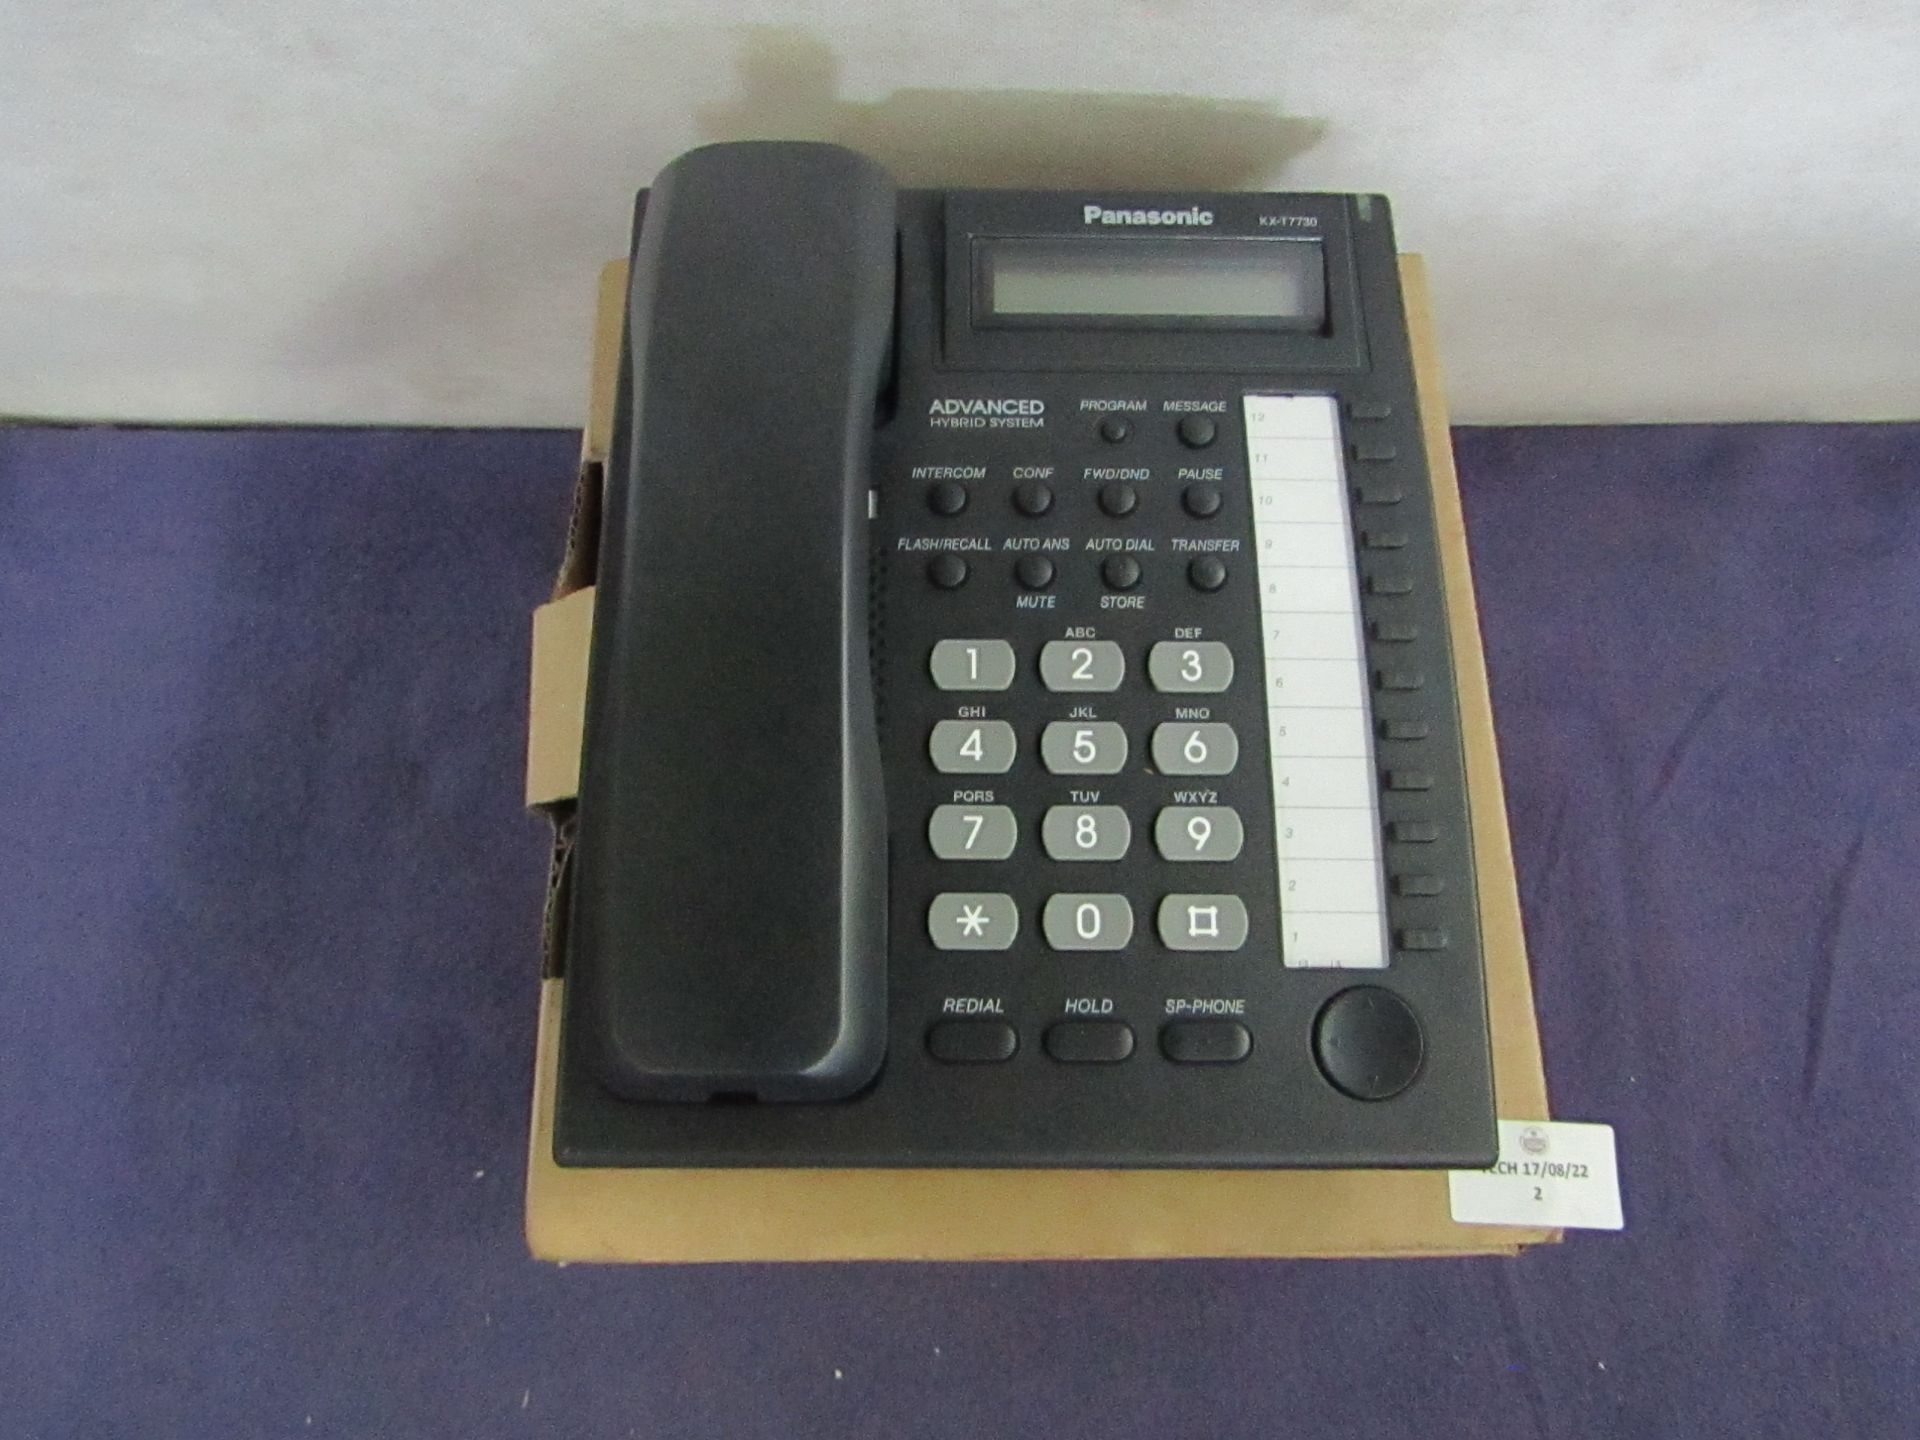 Panasonic - Display Telephone - KXT7730 - Item Looks In Good Condition, With Box.